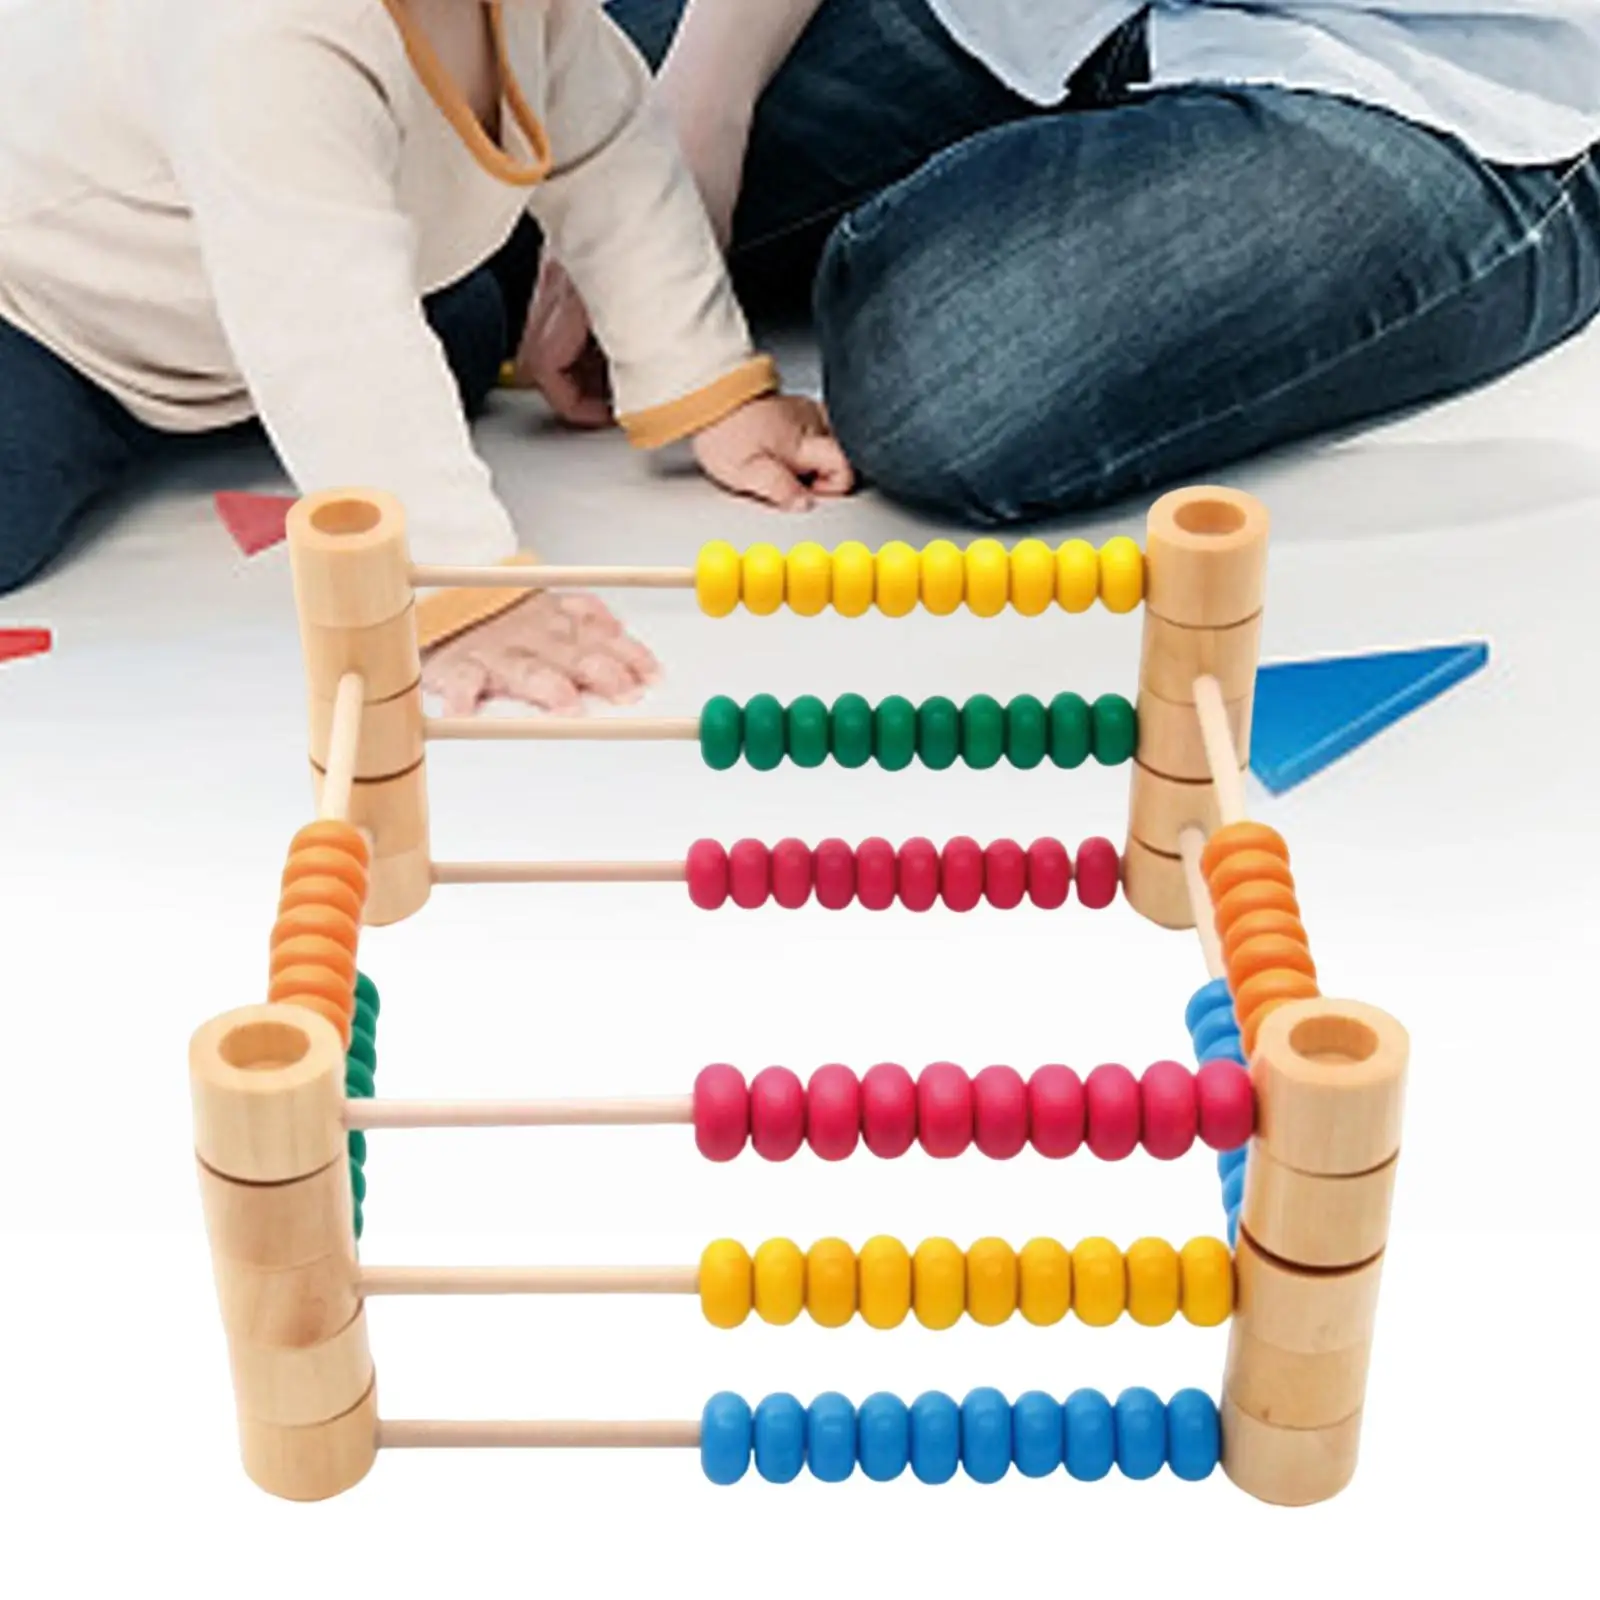 Educational Wooden Abacus Frame Stacking Manipulative Materials Math Learning